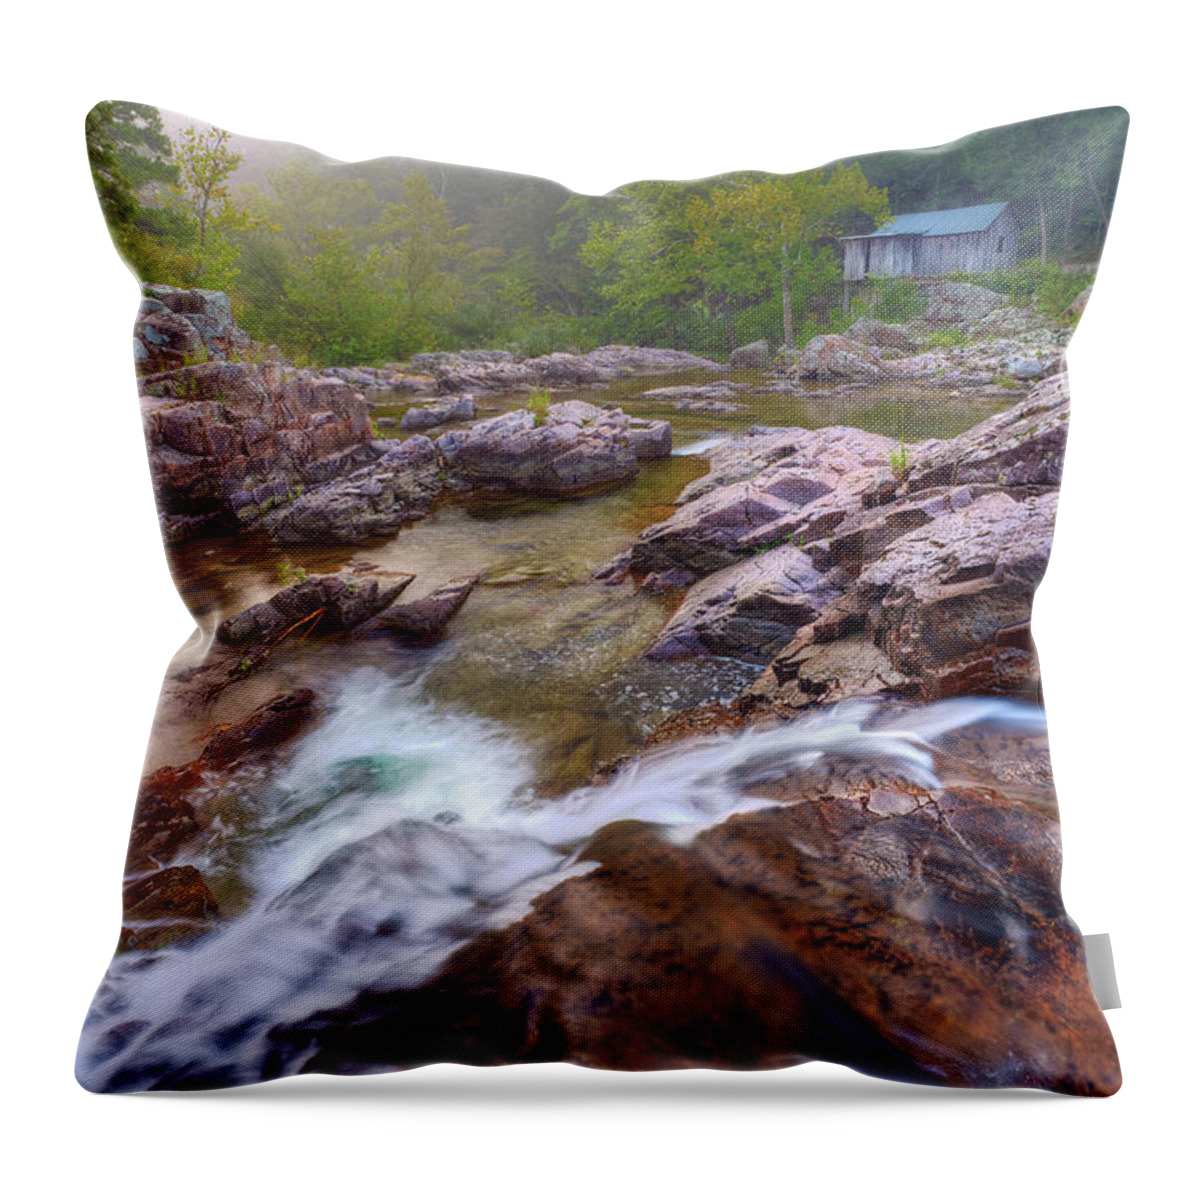 Ozark National Scenic Riverways Throw Pillow featuring the photograph Klepzig Mill by Robert Charity